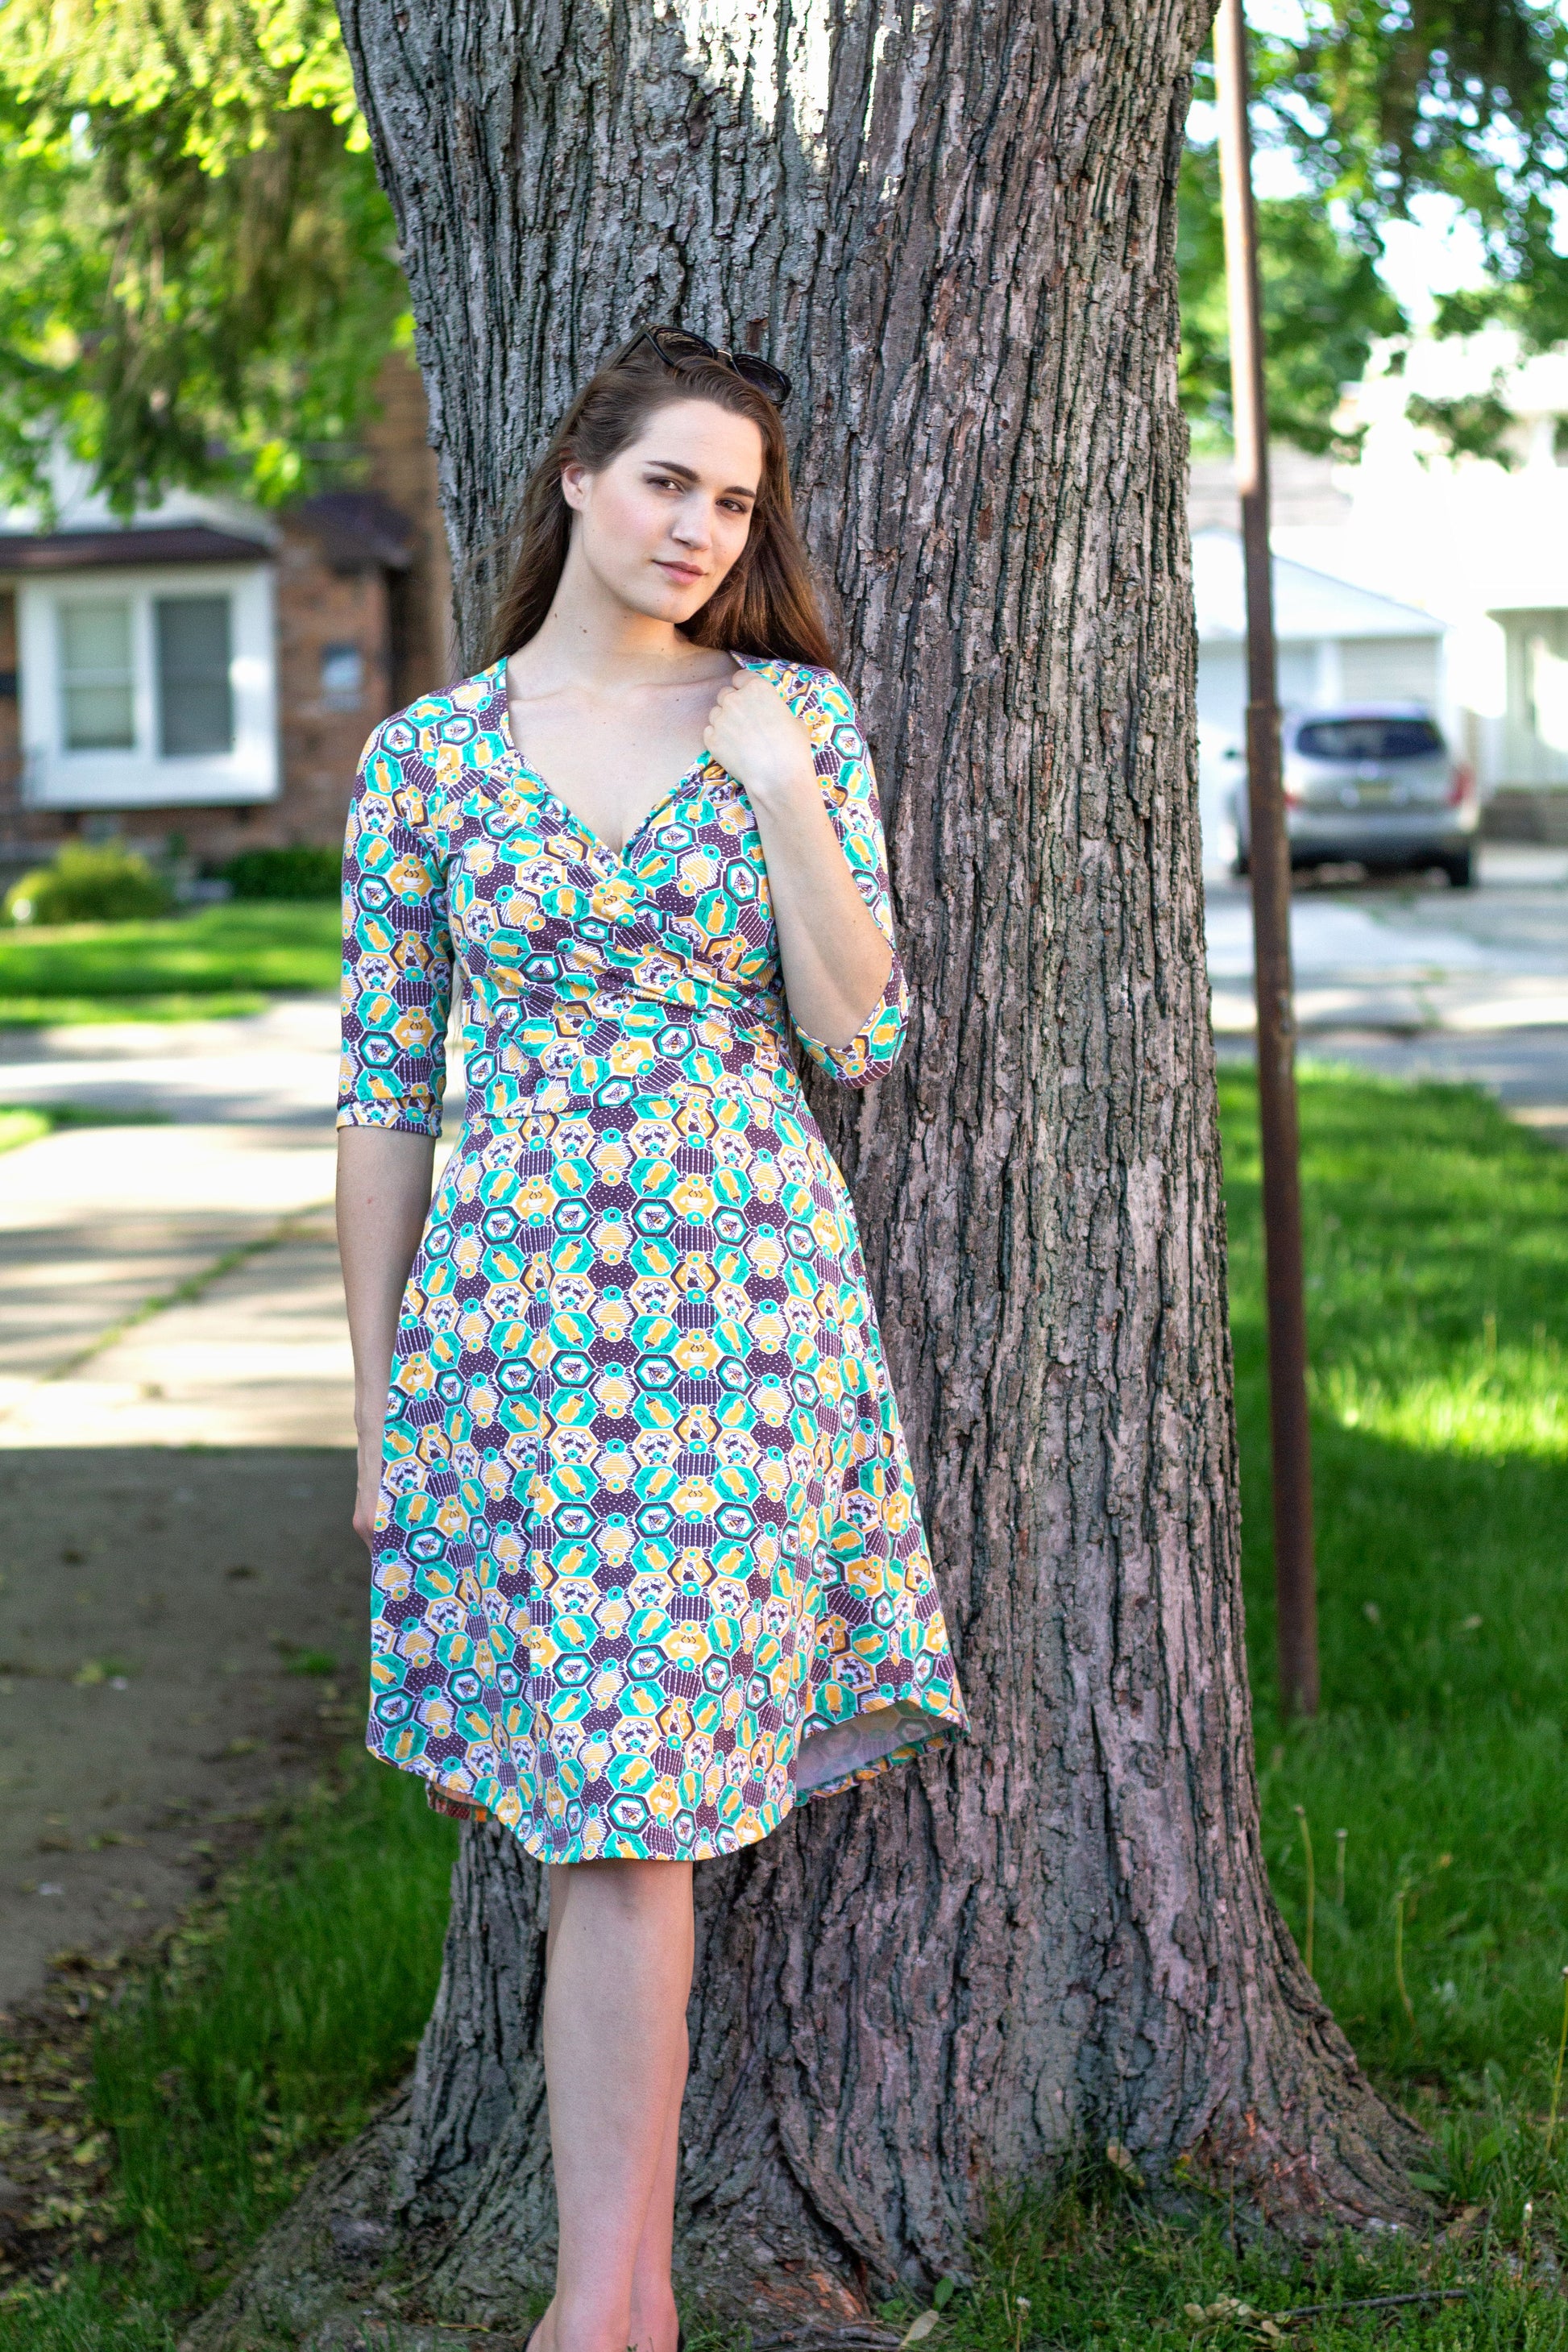 Brown-haired model wearing yellow, green and brown honeybee and hexagon print wrap dress and standing in front of a tree 